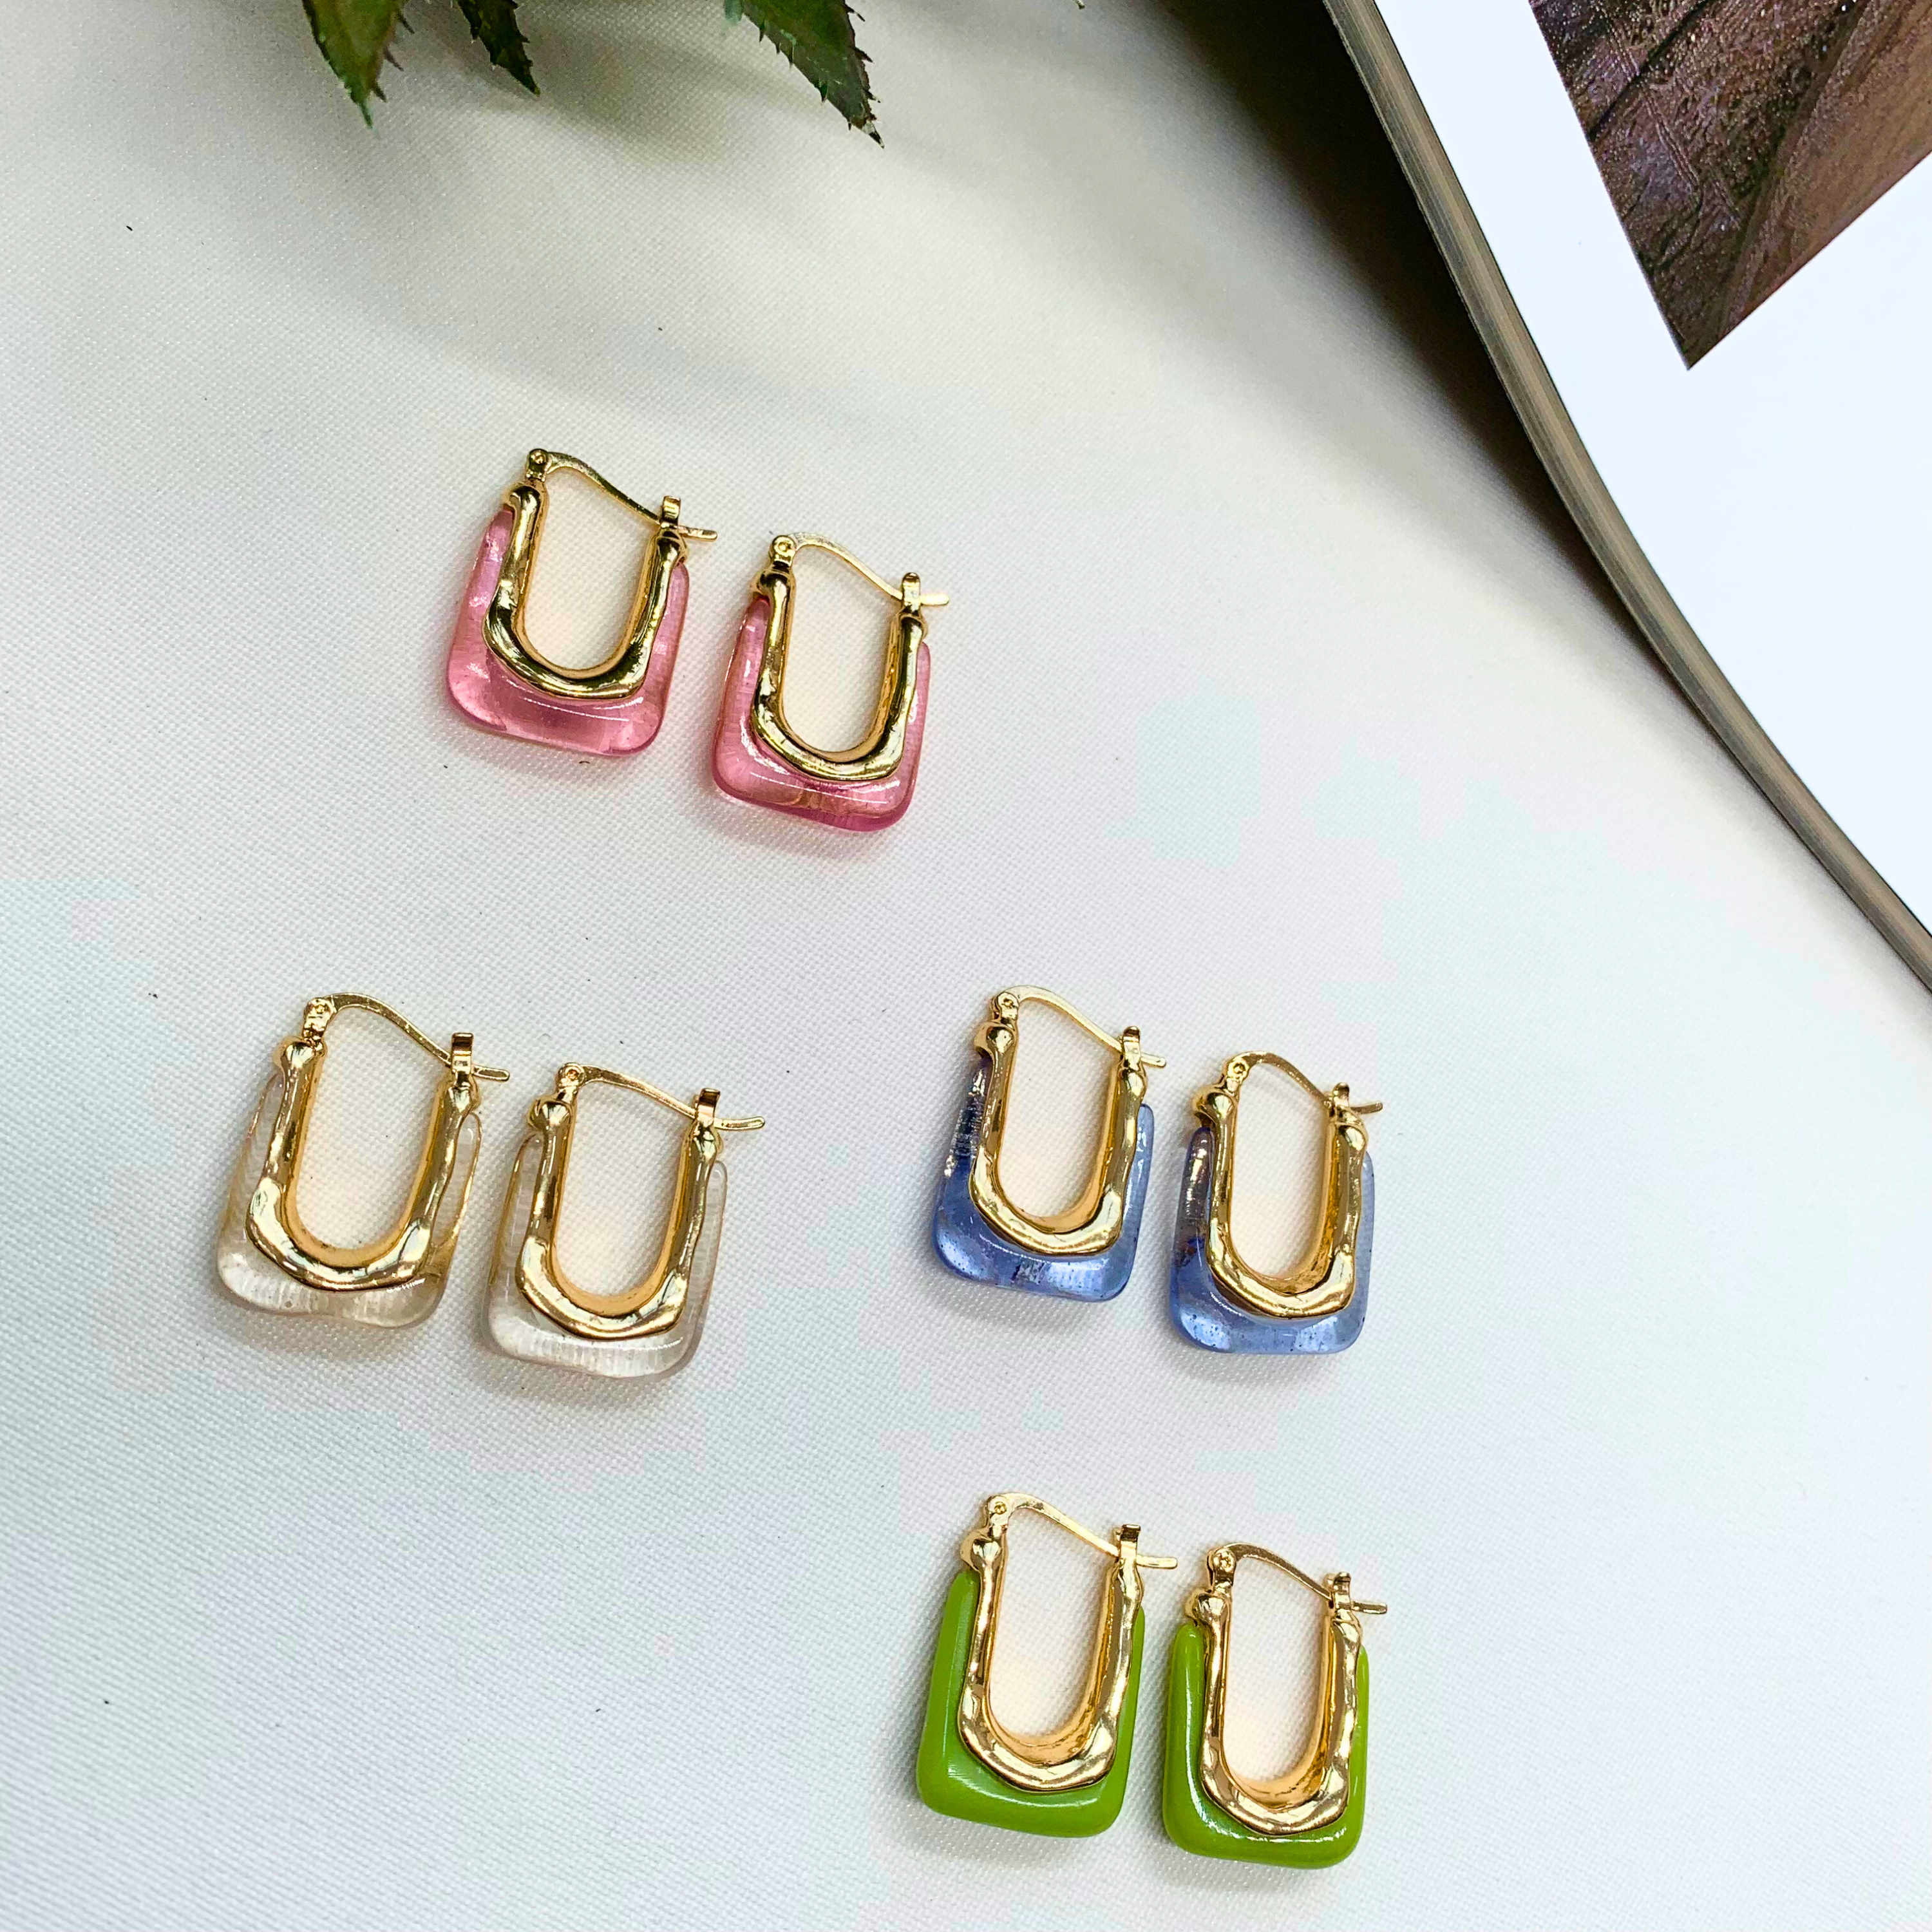 TFC Square White Resin Gold Plated Hoop Earrings- Discover daily wear gold earrings including stud earrings, hoop earrings, and pearl earrings, perfect as earrings for women and earrings for girls.Find the cheapest fashion jewellery which is anti-tarnis​h only at The Fun company